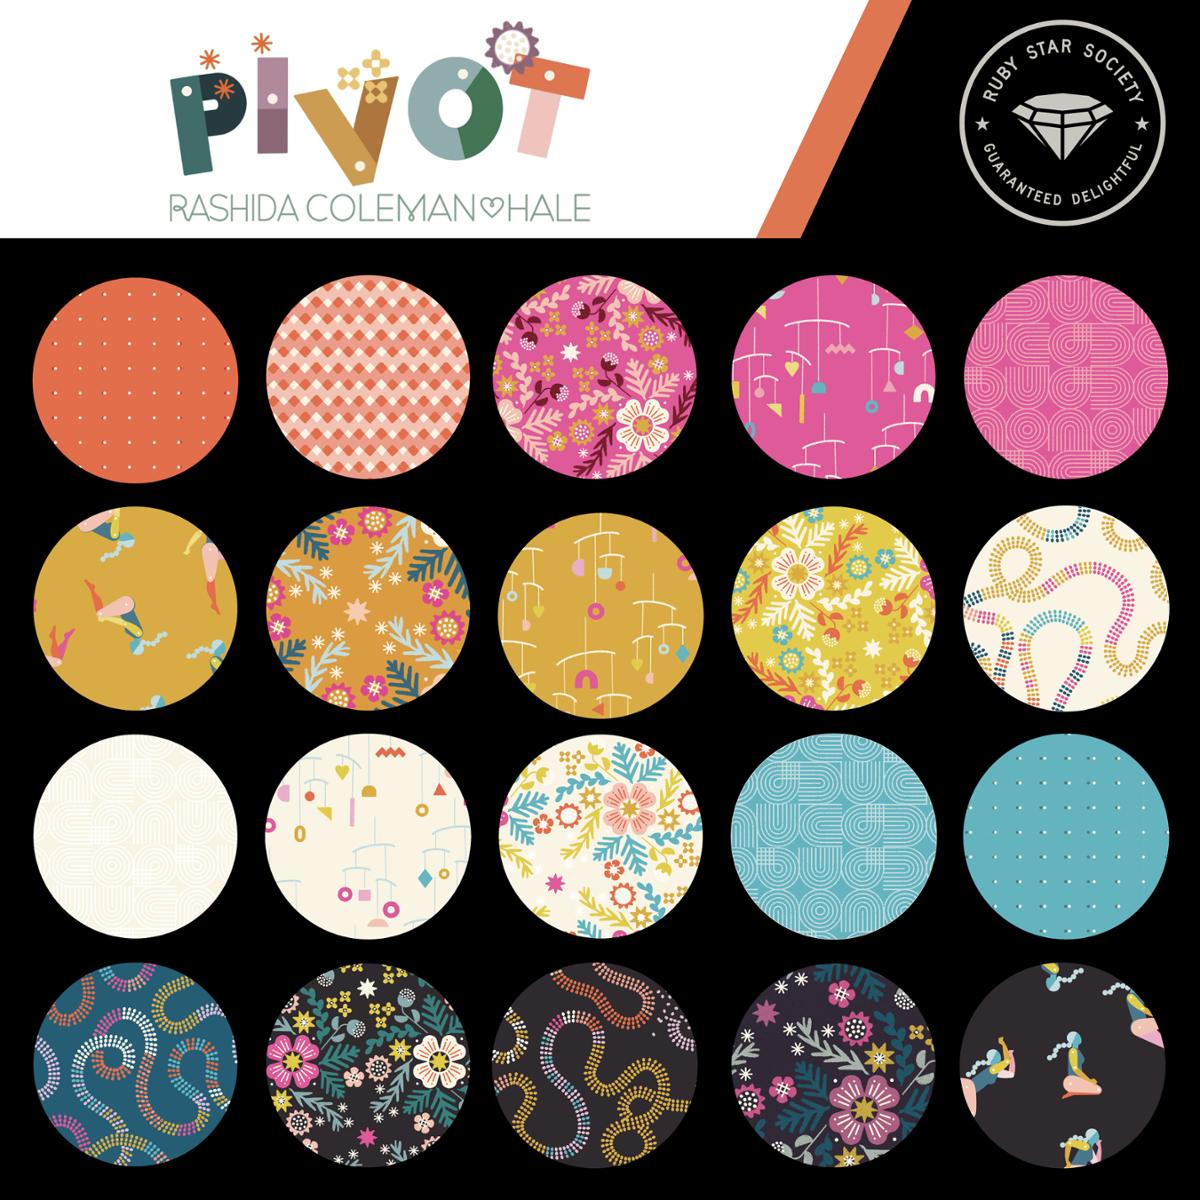 This FAT QUARTER BUNDLE contains 22 quilting cotton prints from Pivot by Rashida Coleman-Hale for Ruby Star Society.  Manufacturer: Ruby Star Society Designer: Rashida Coleman-Hale Collection: Pivot Material: 100% Cotton  Weight: Quilting